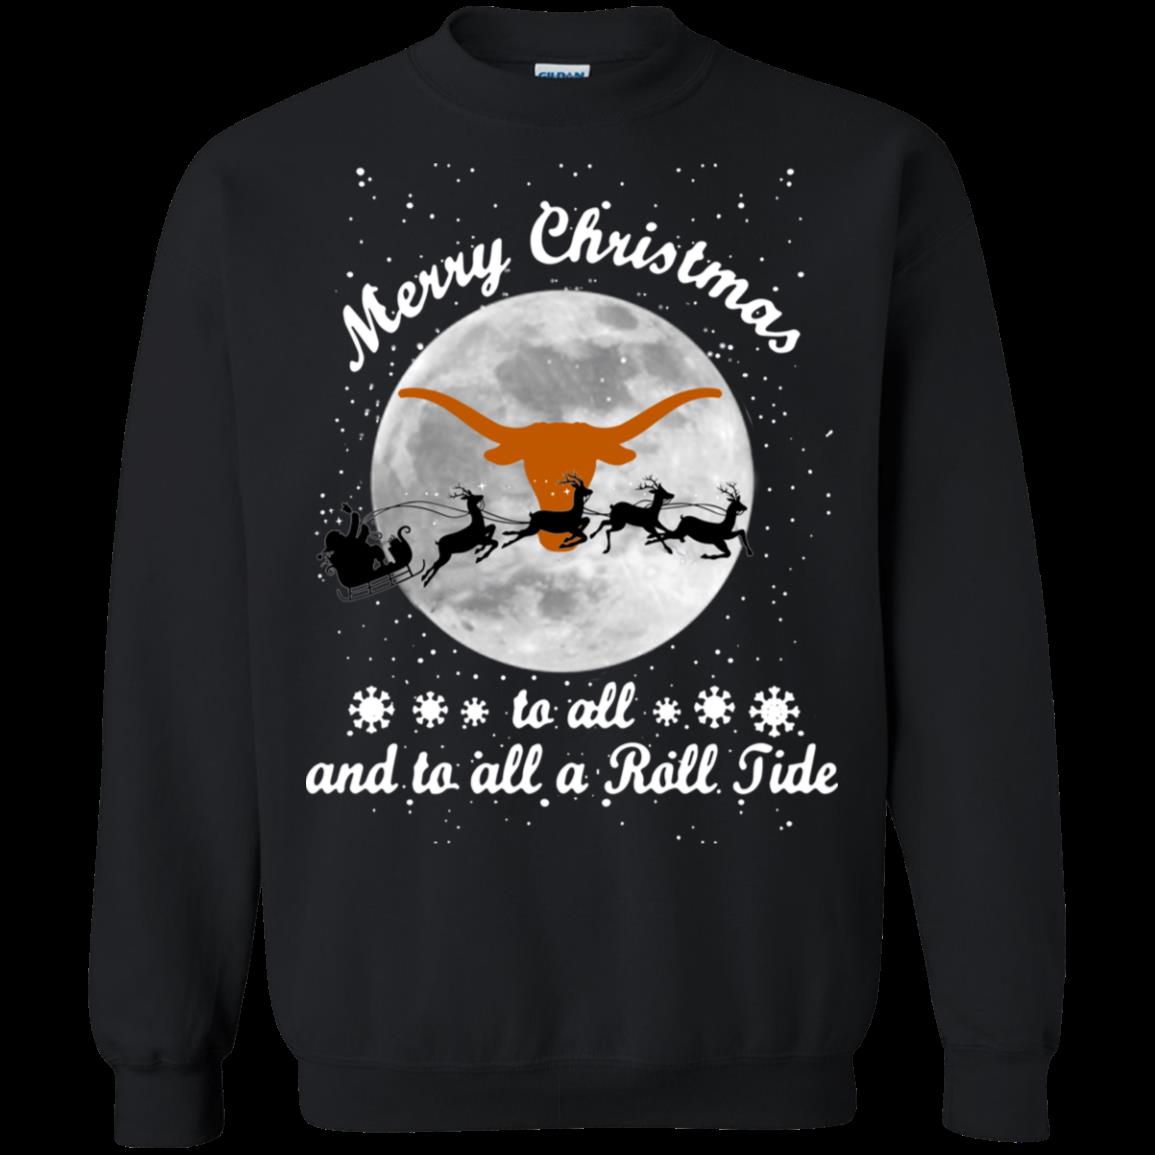 Merry Christmas Texas Longhorns To All And To All A Roll Tide Shirt Sweatshirt